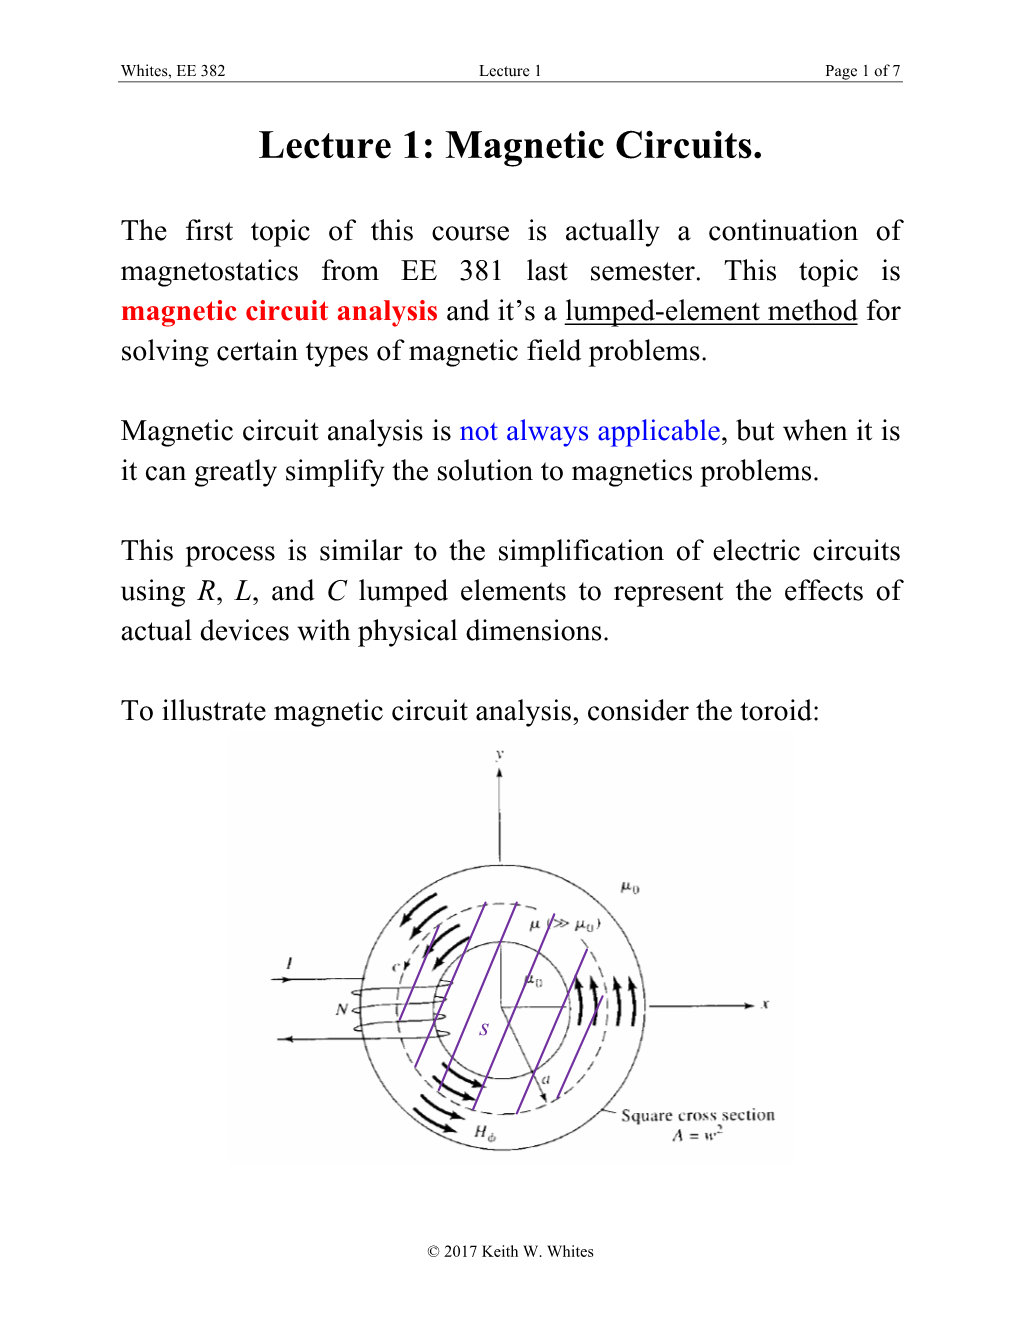 Lecture 1: Magnetic Circuits